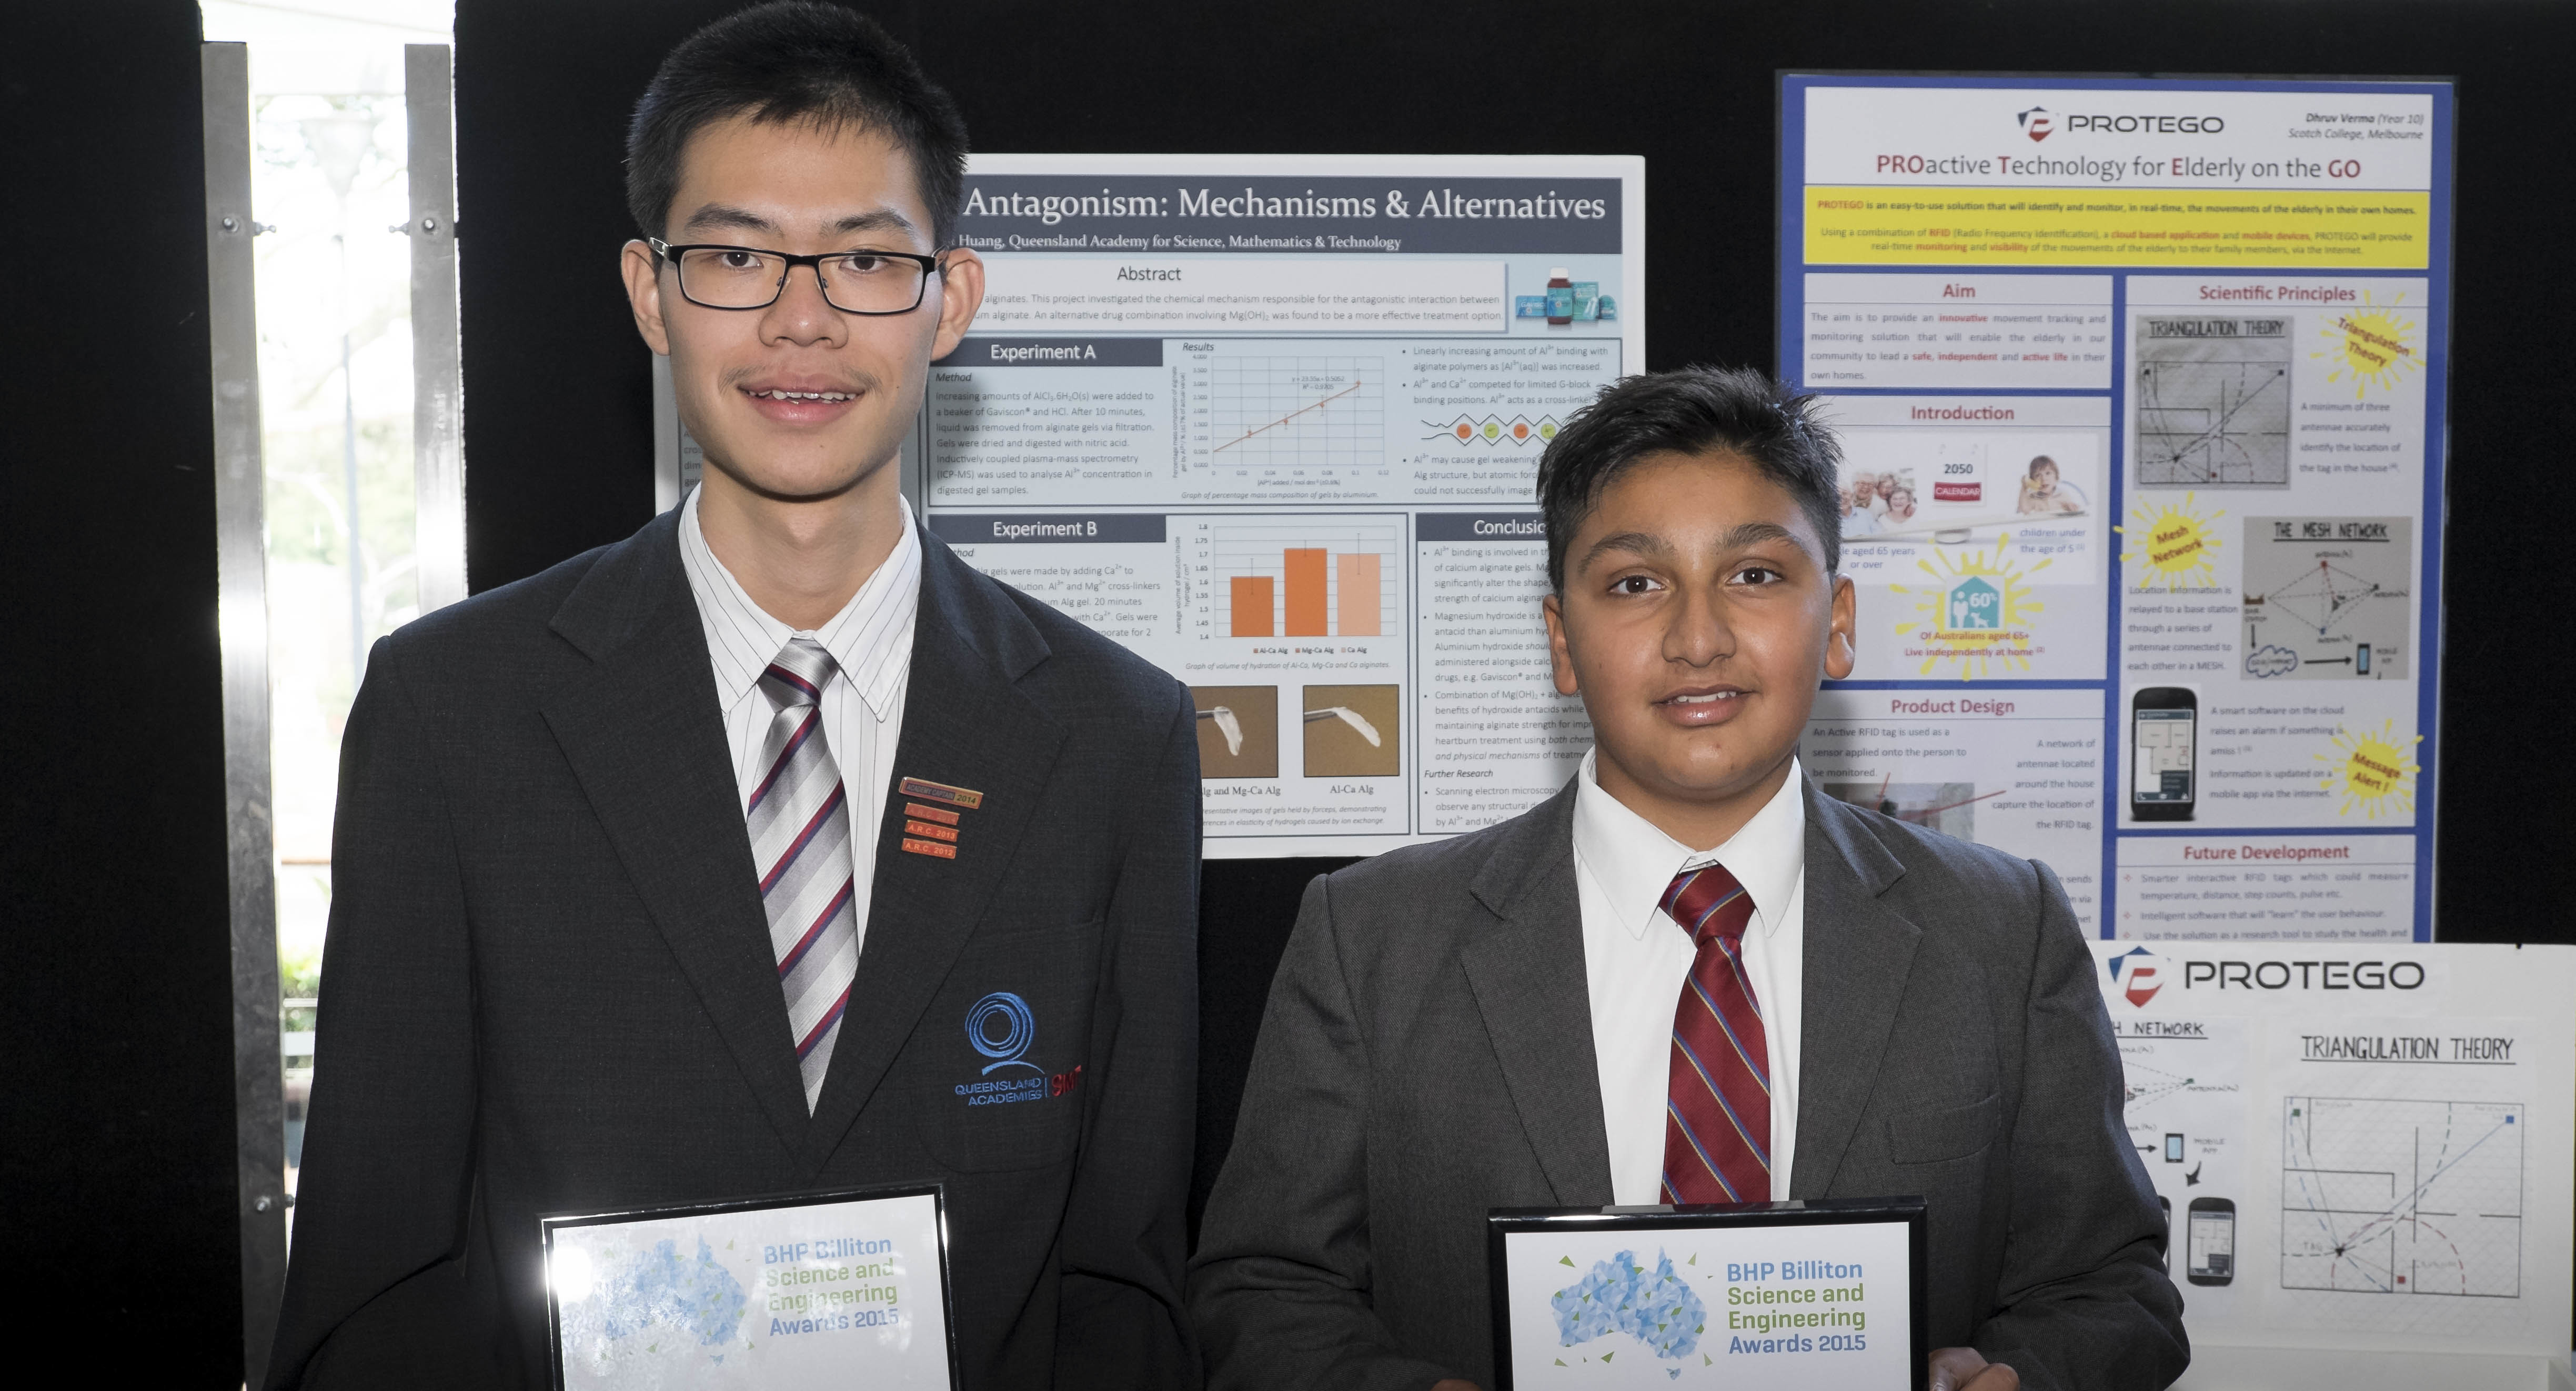 Jackson Huang and Dhruv Verma are your 2015 BHP Billiton Science and Engineering Award winners.